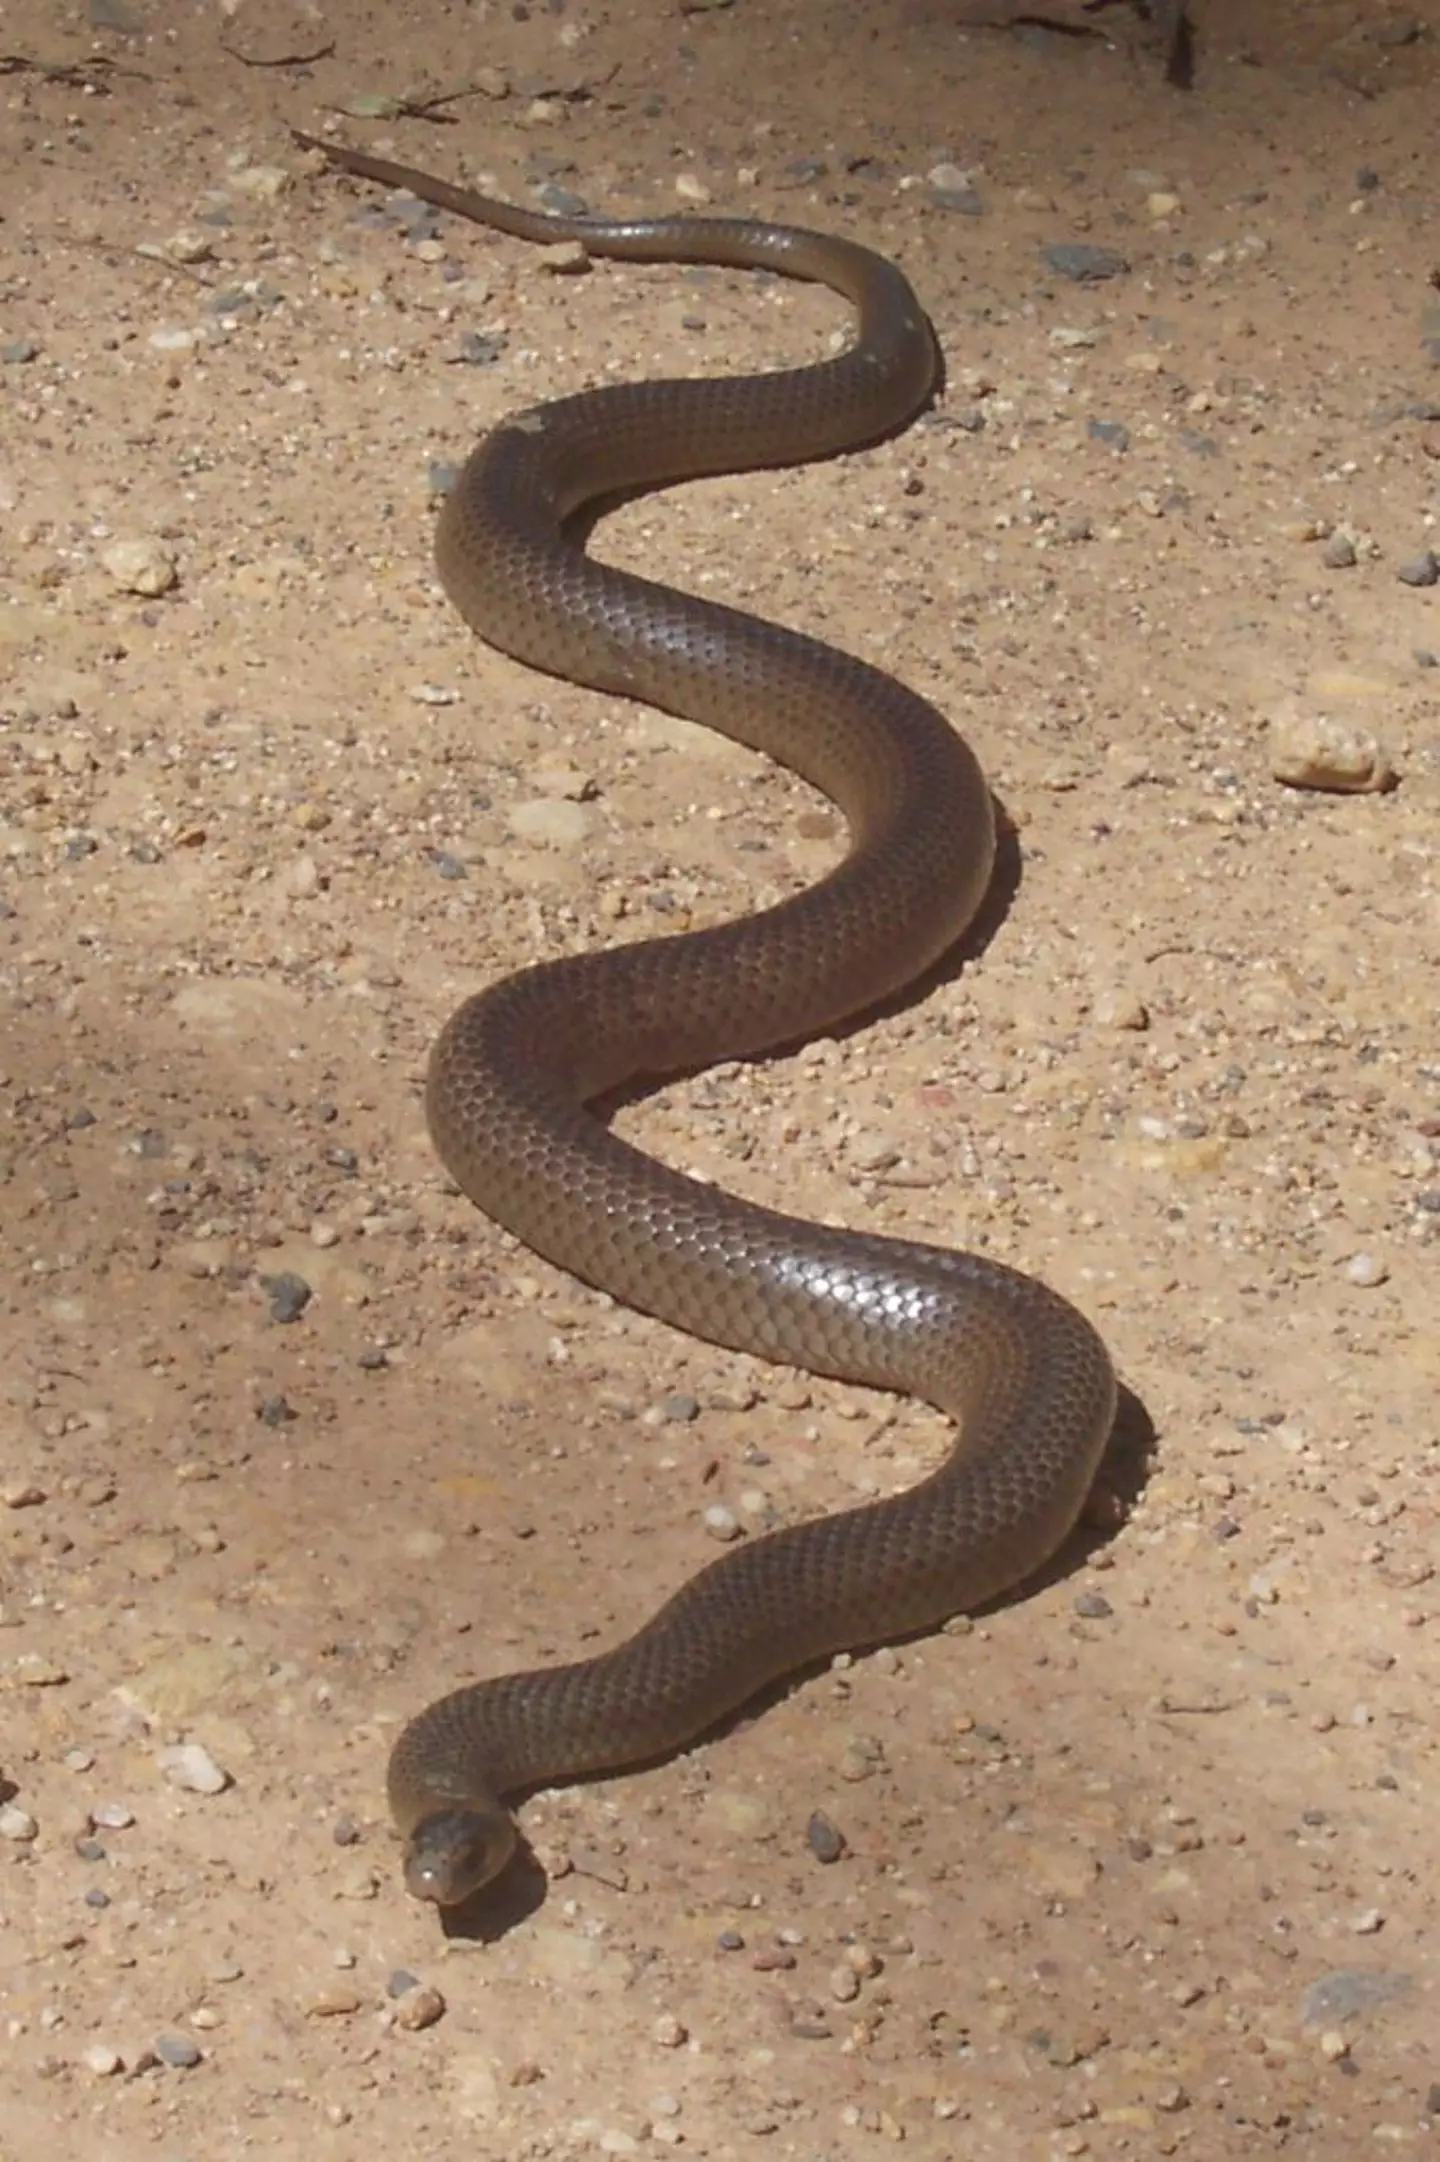 Eastern Browns are one of the world's deadliest snakes.